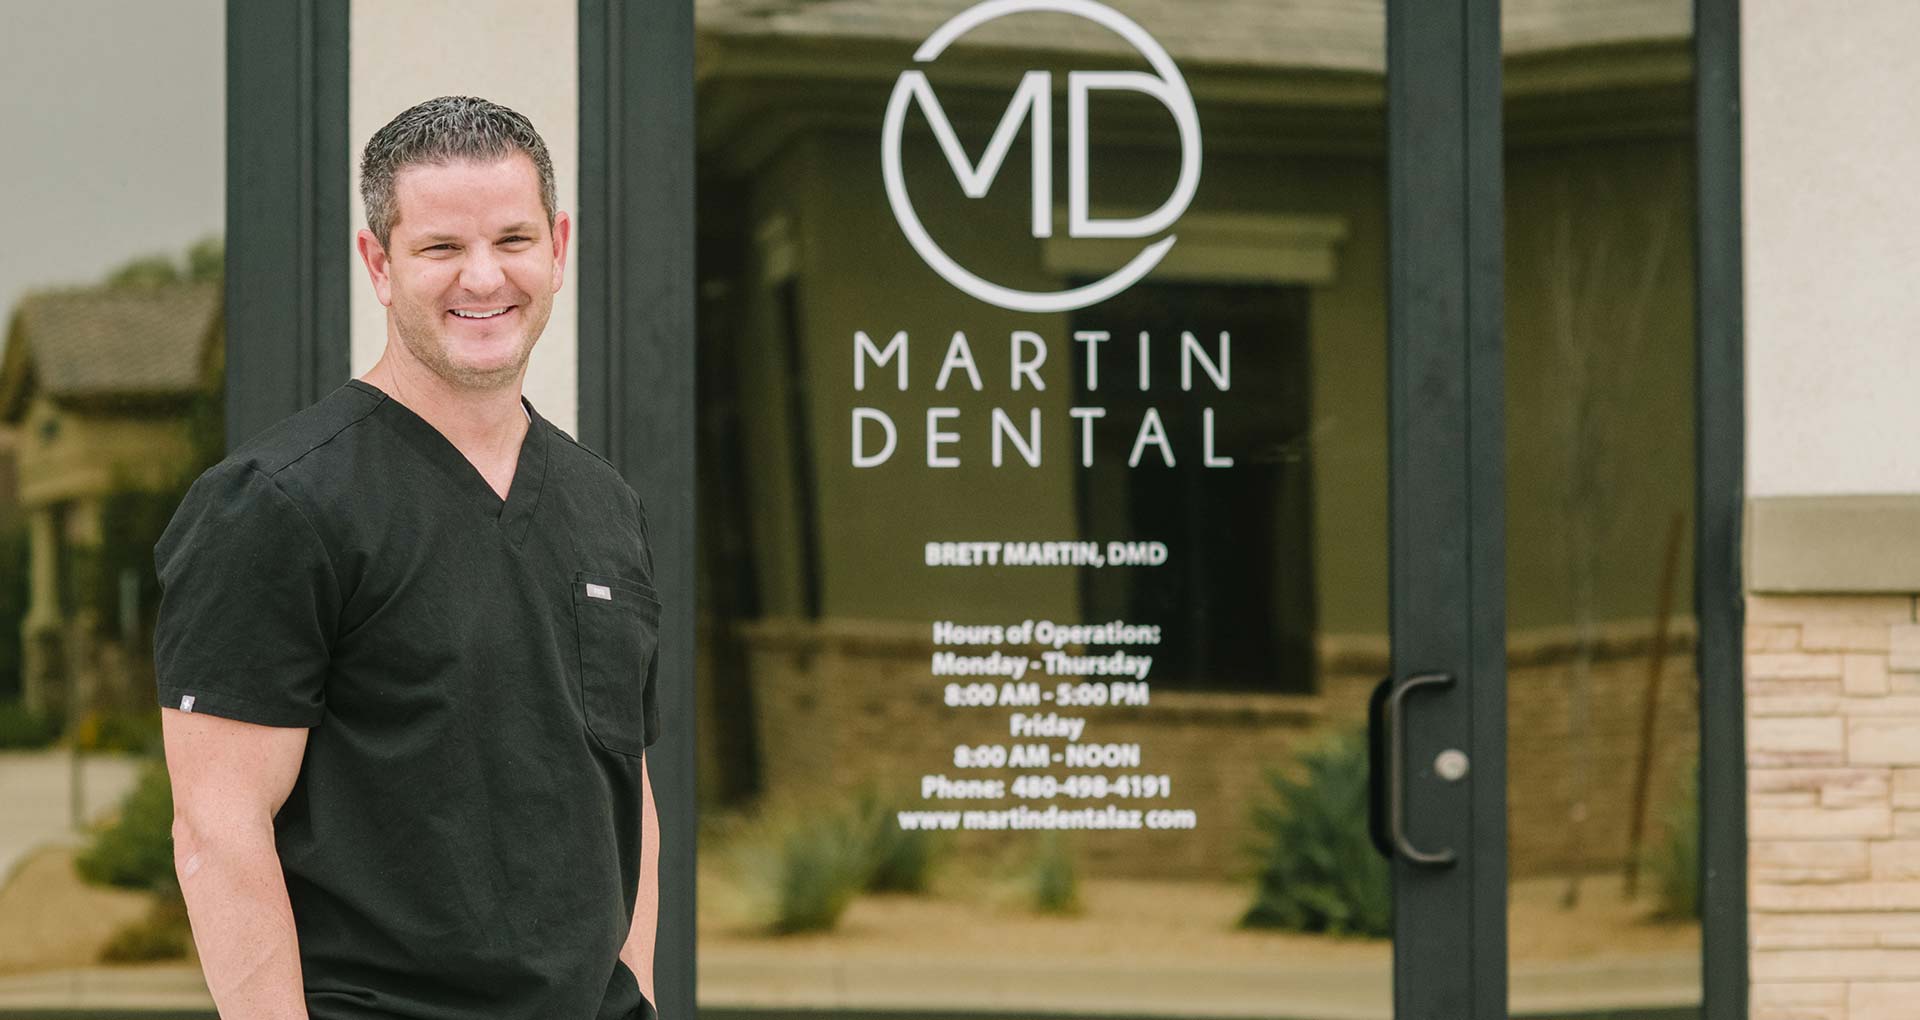 Contact Martin Dental for Affordable Tooth Sensitivity Solutions